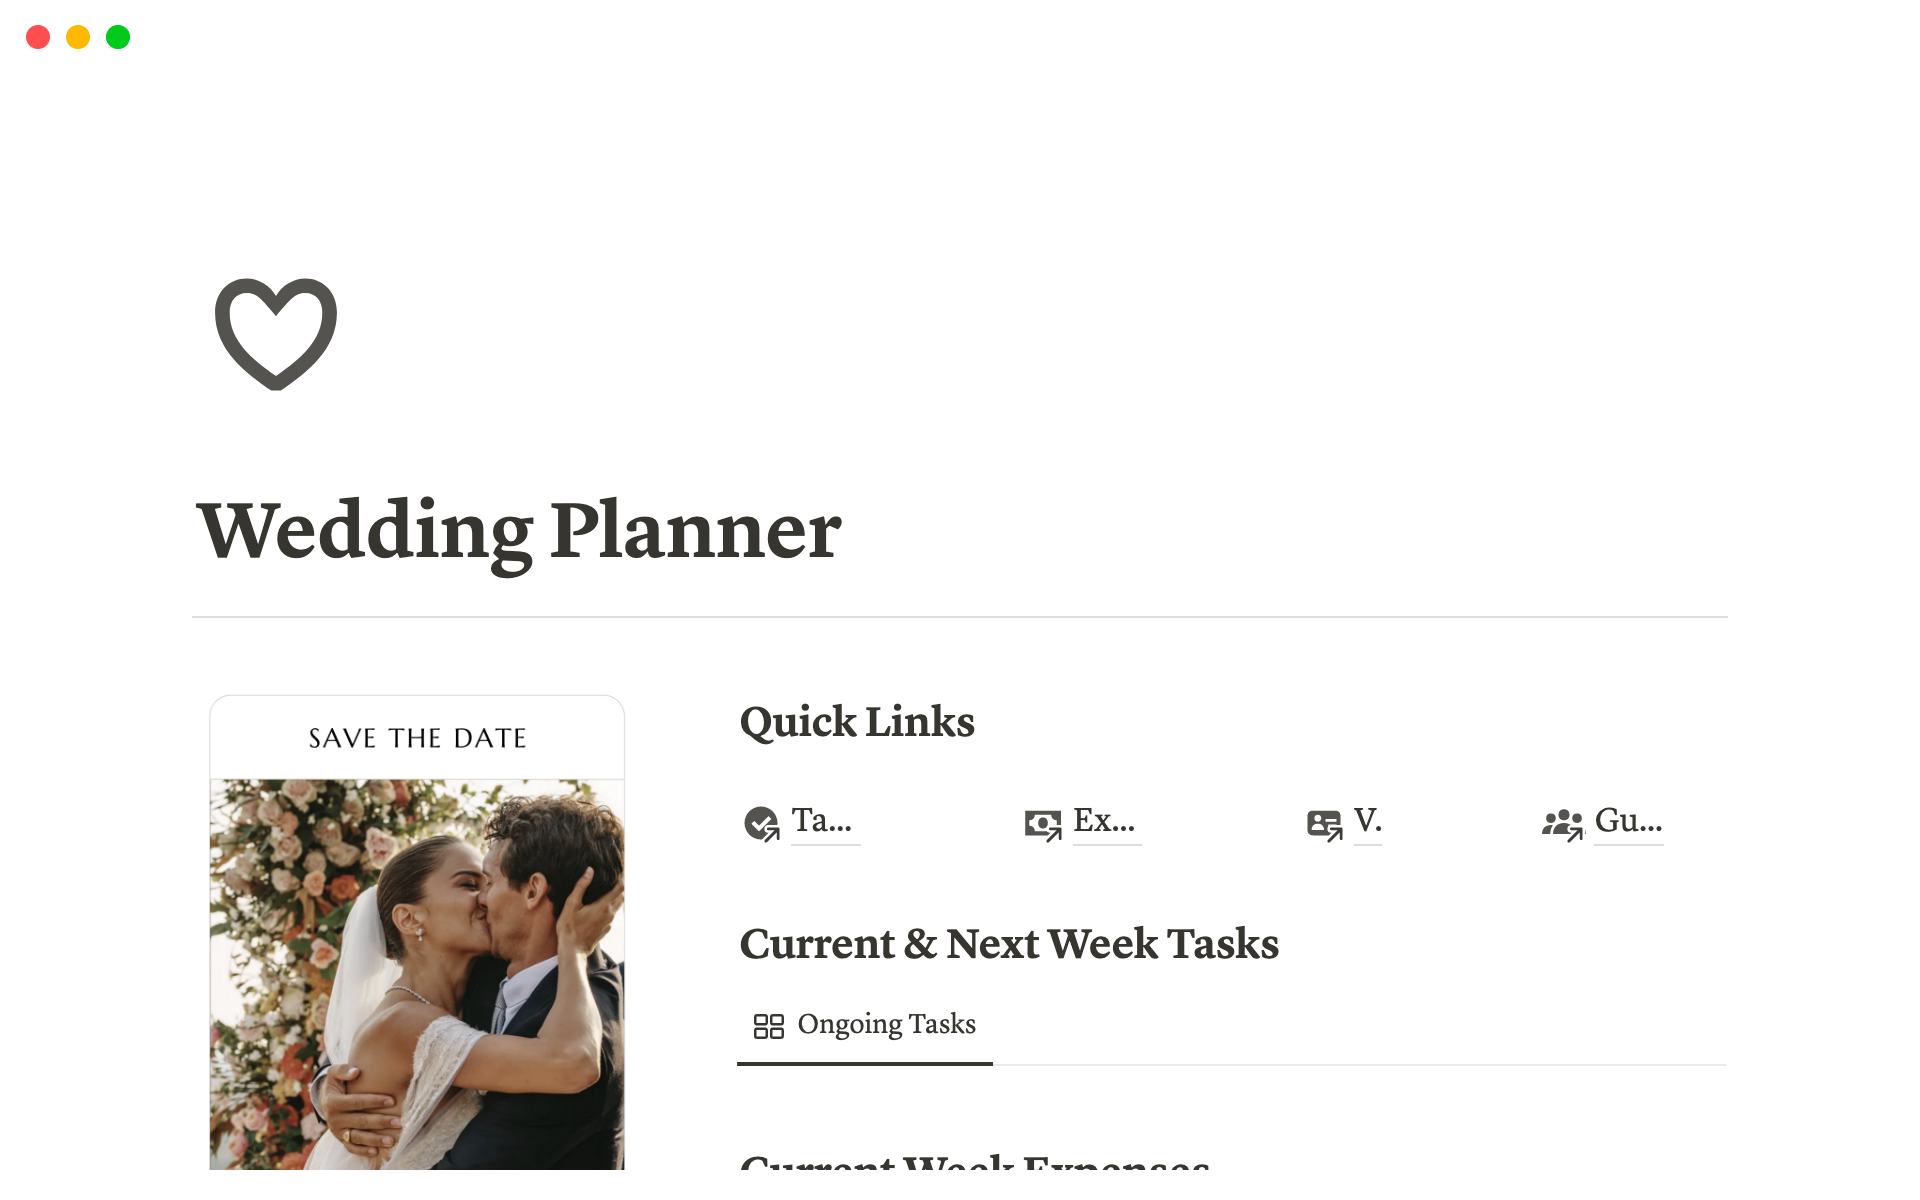 Ultimate wedding planner, designed to help you organize and plan every aspect of your big day.